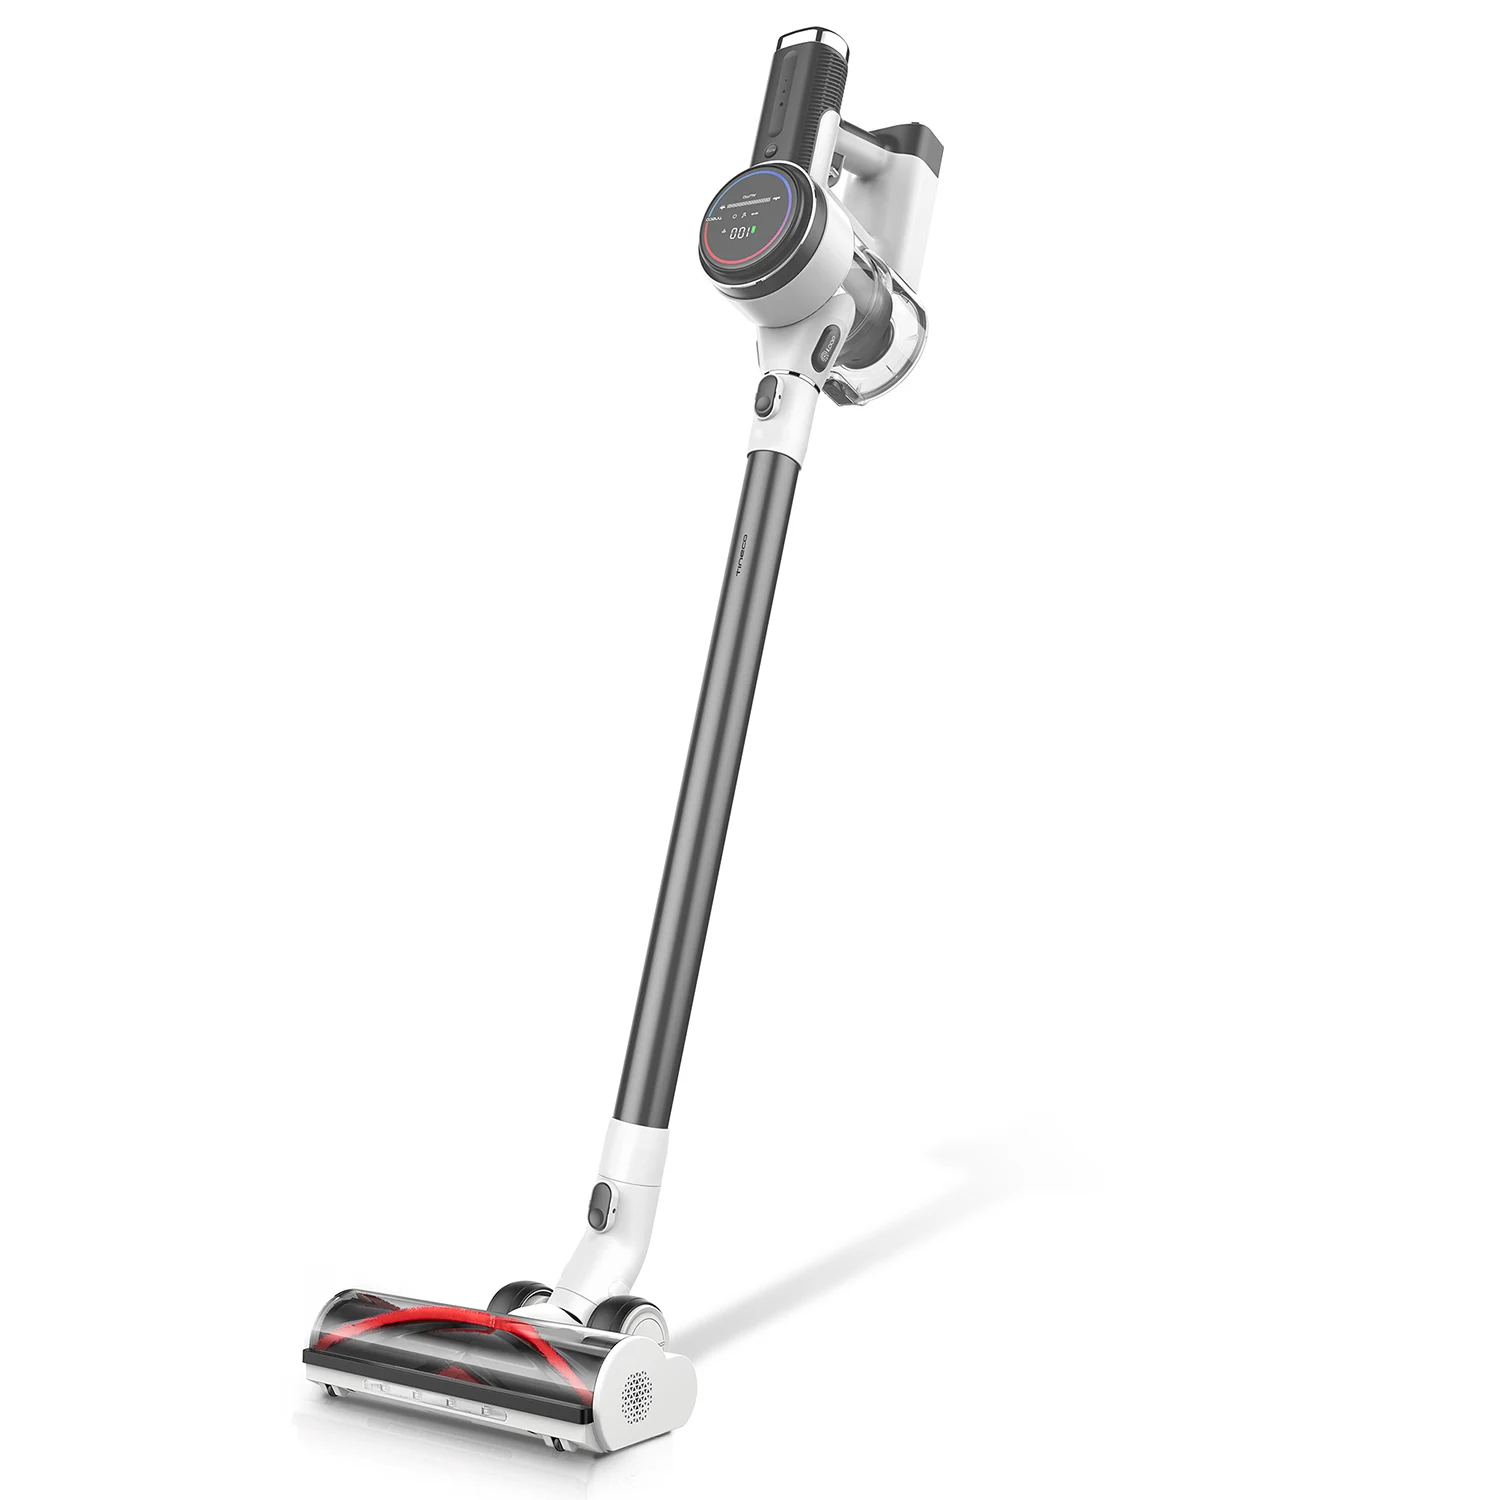 Tineco Pure One S12 Vacuum Cleaner | Powerful Cordless Vacuum Cleaner - S12  Cordless - Aliexpress